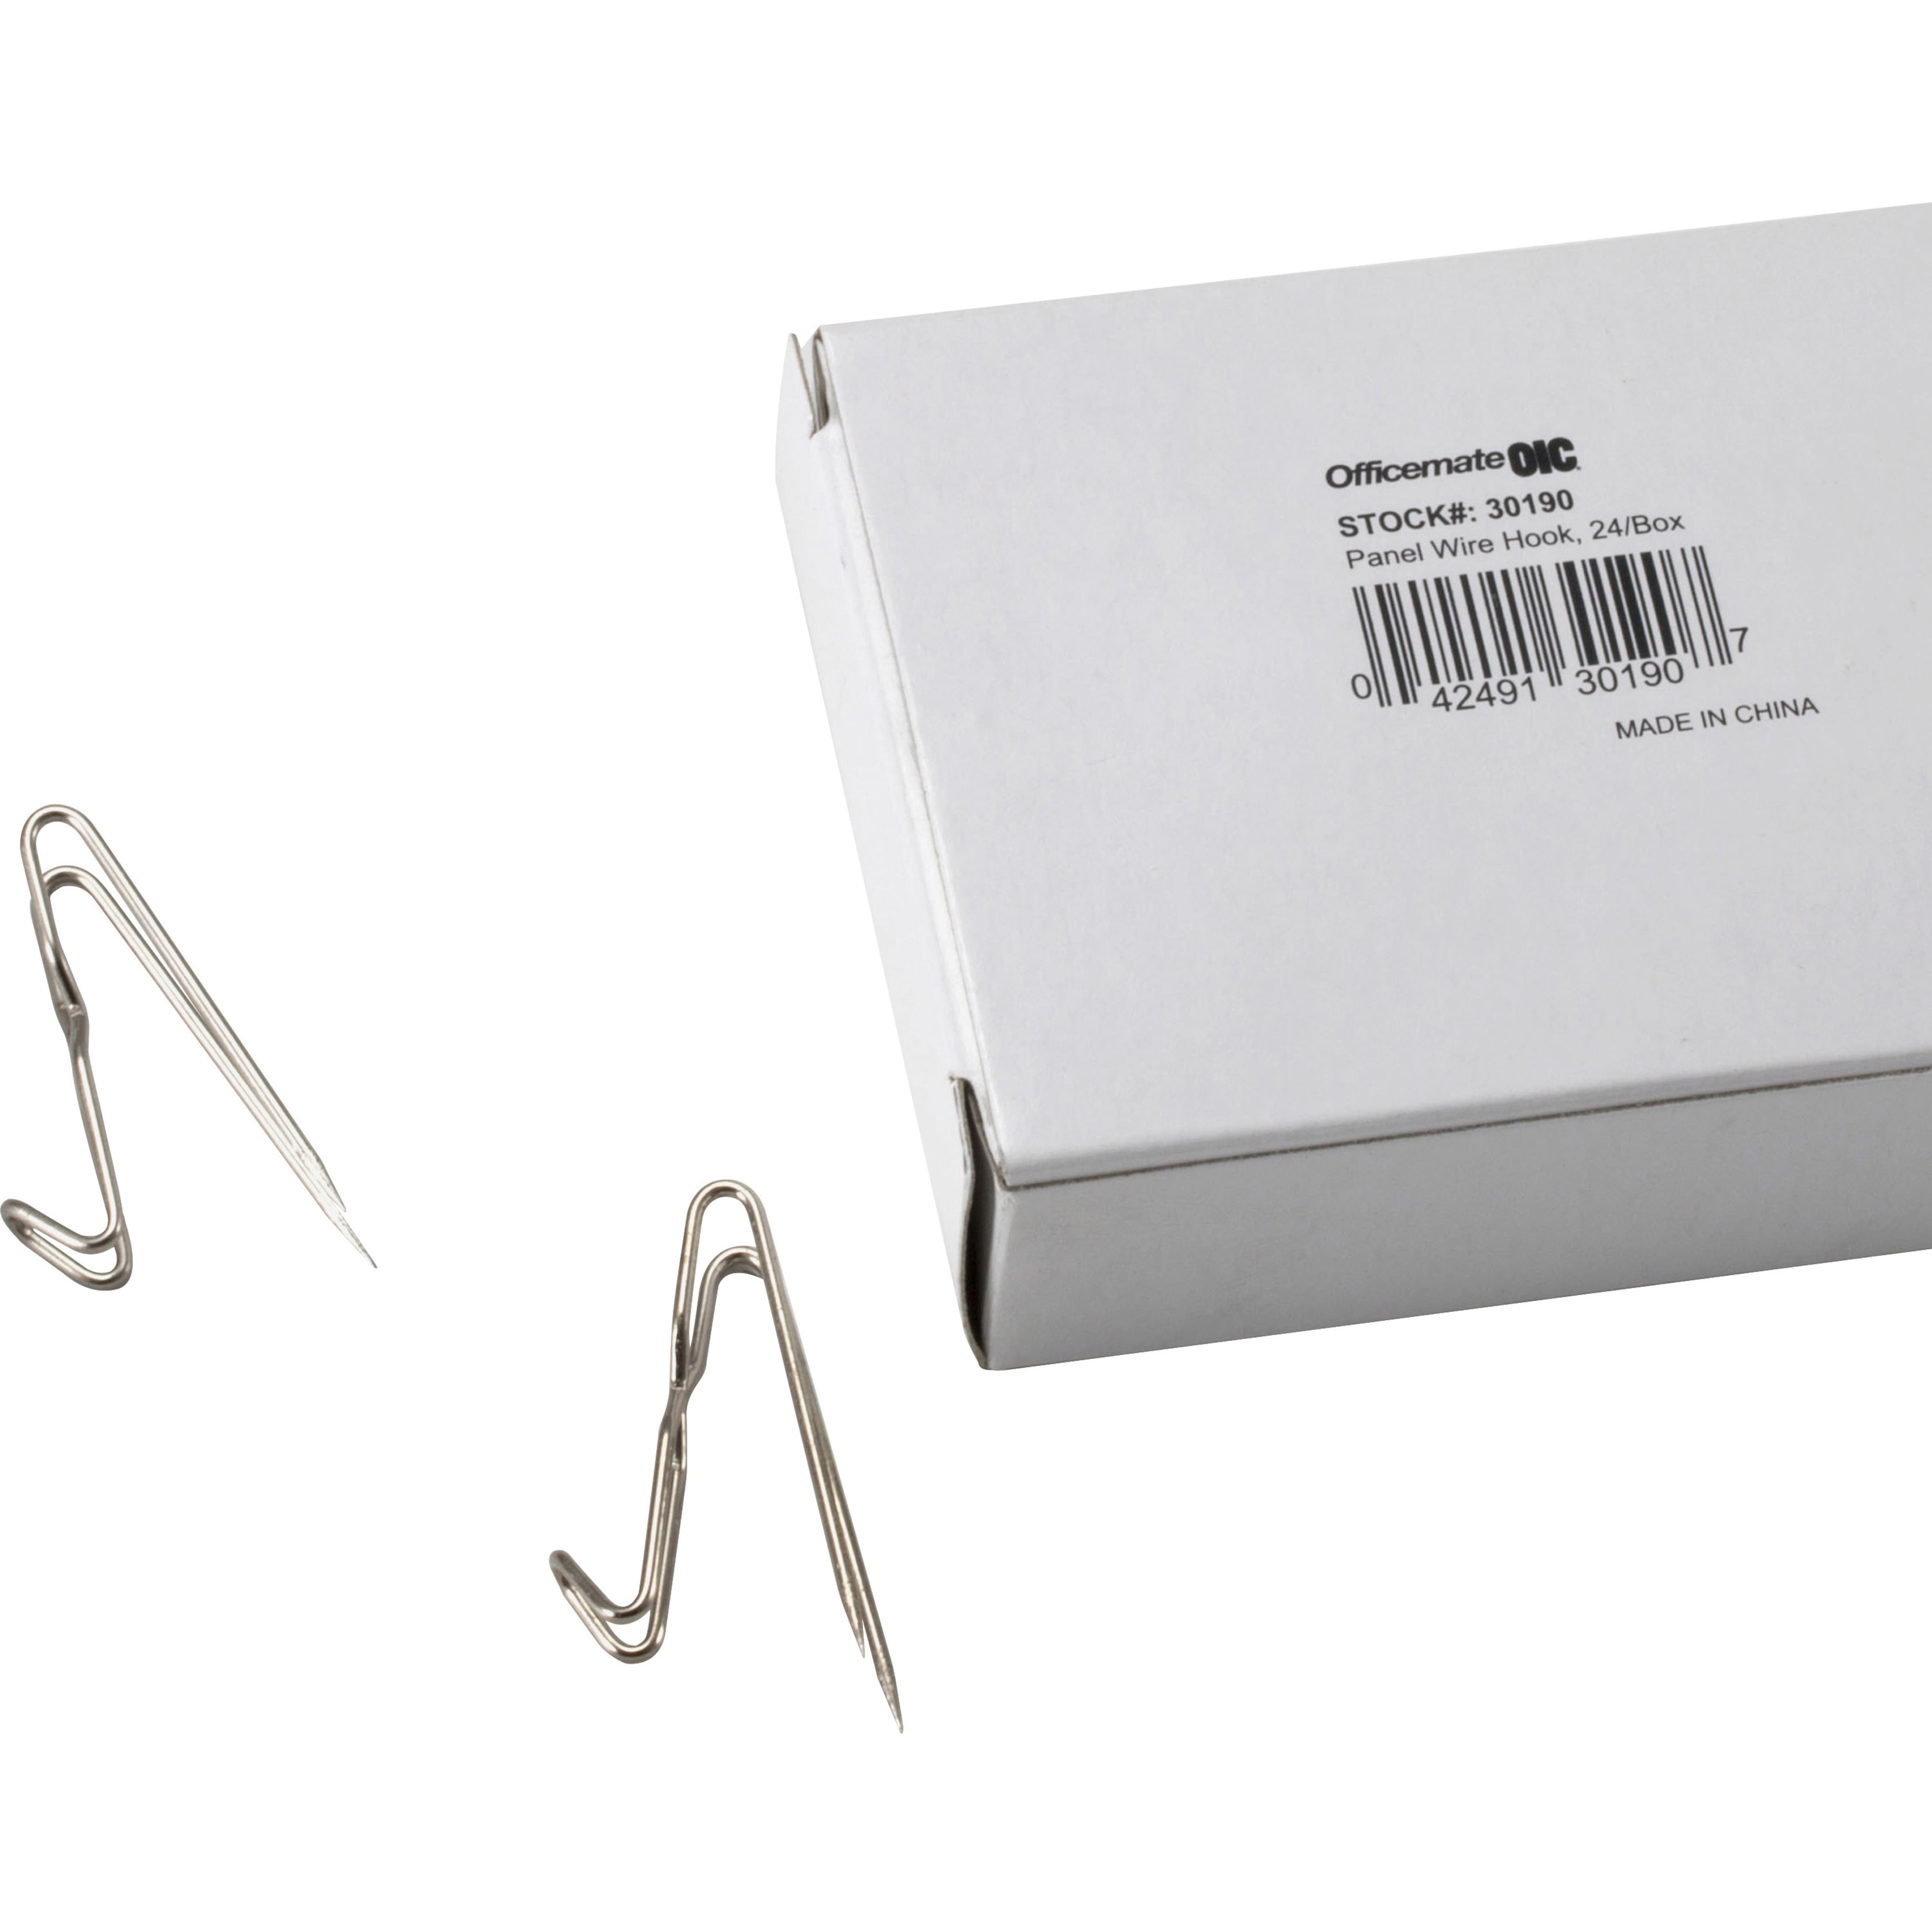 Box of 24 30190 Officemate Panel Wire Hooks 6 Pack Silver 